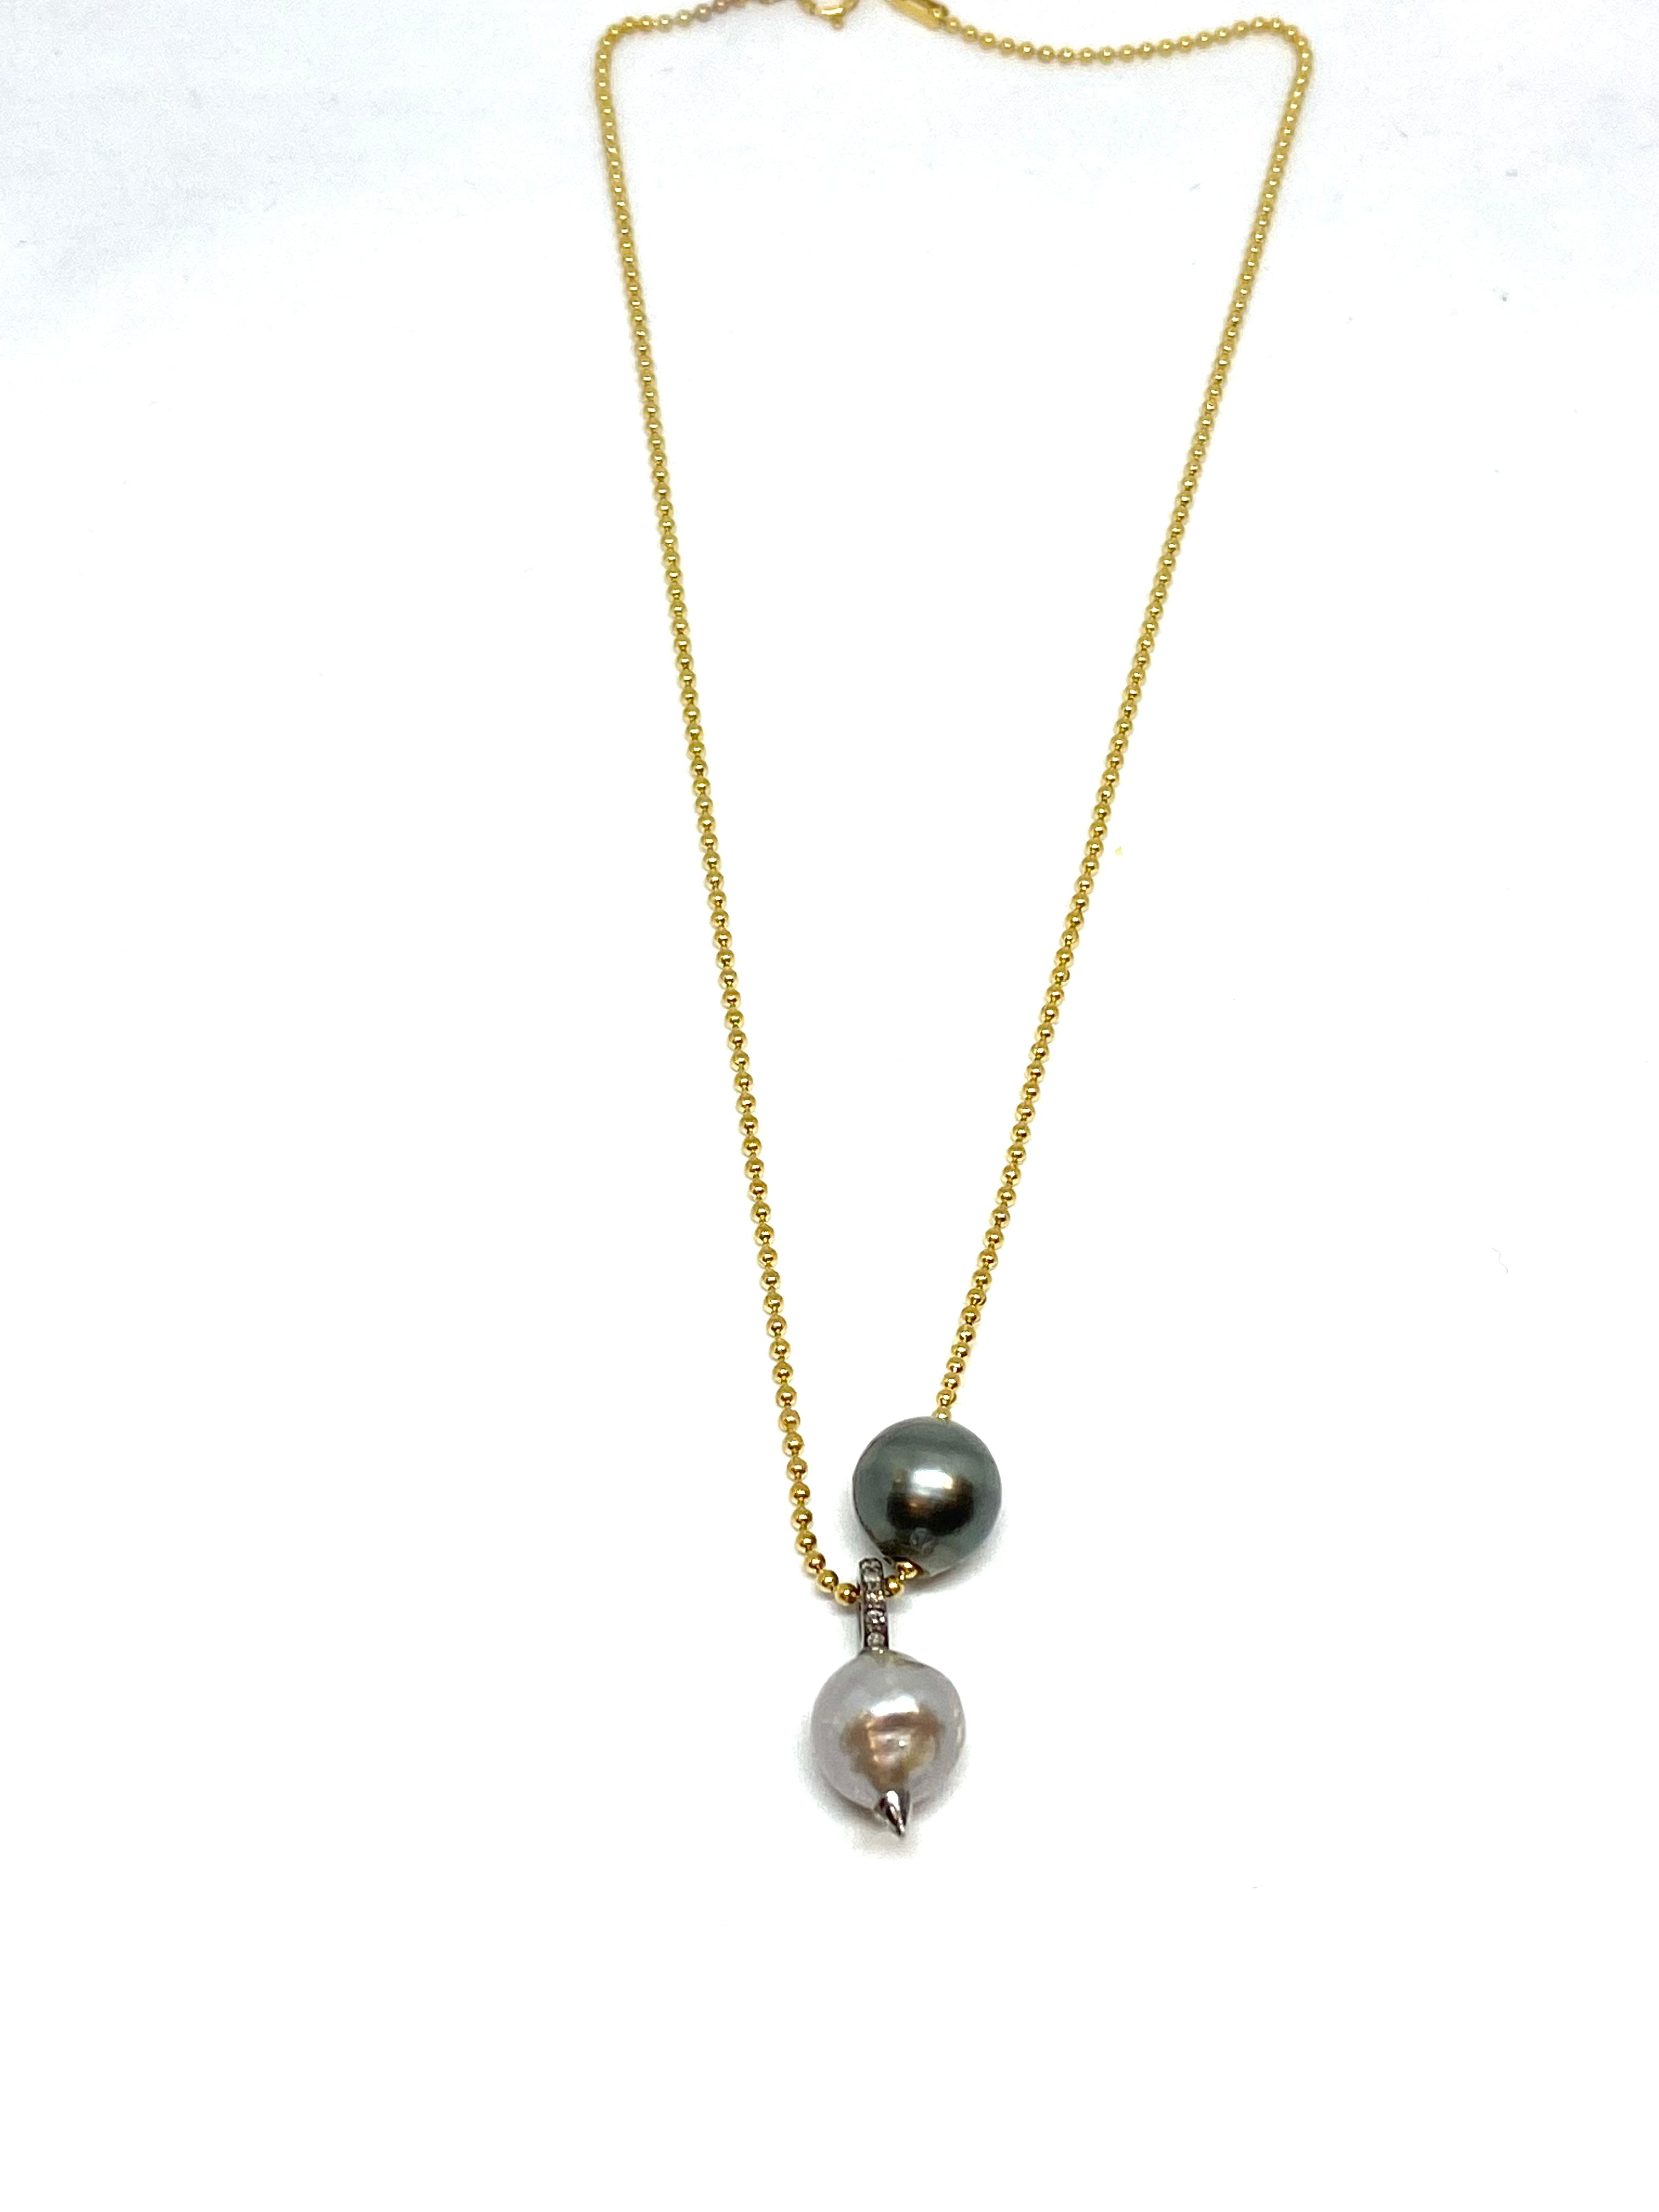 Nathan and moe chain necklace with Tahitian pearl and Baroque pearl pendant found at Patricia in southern pines, nc